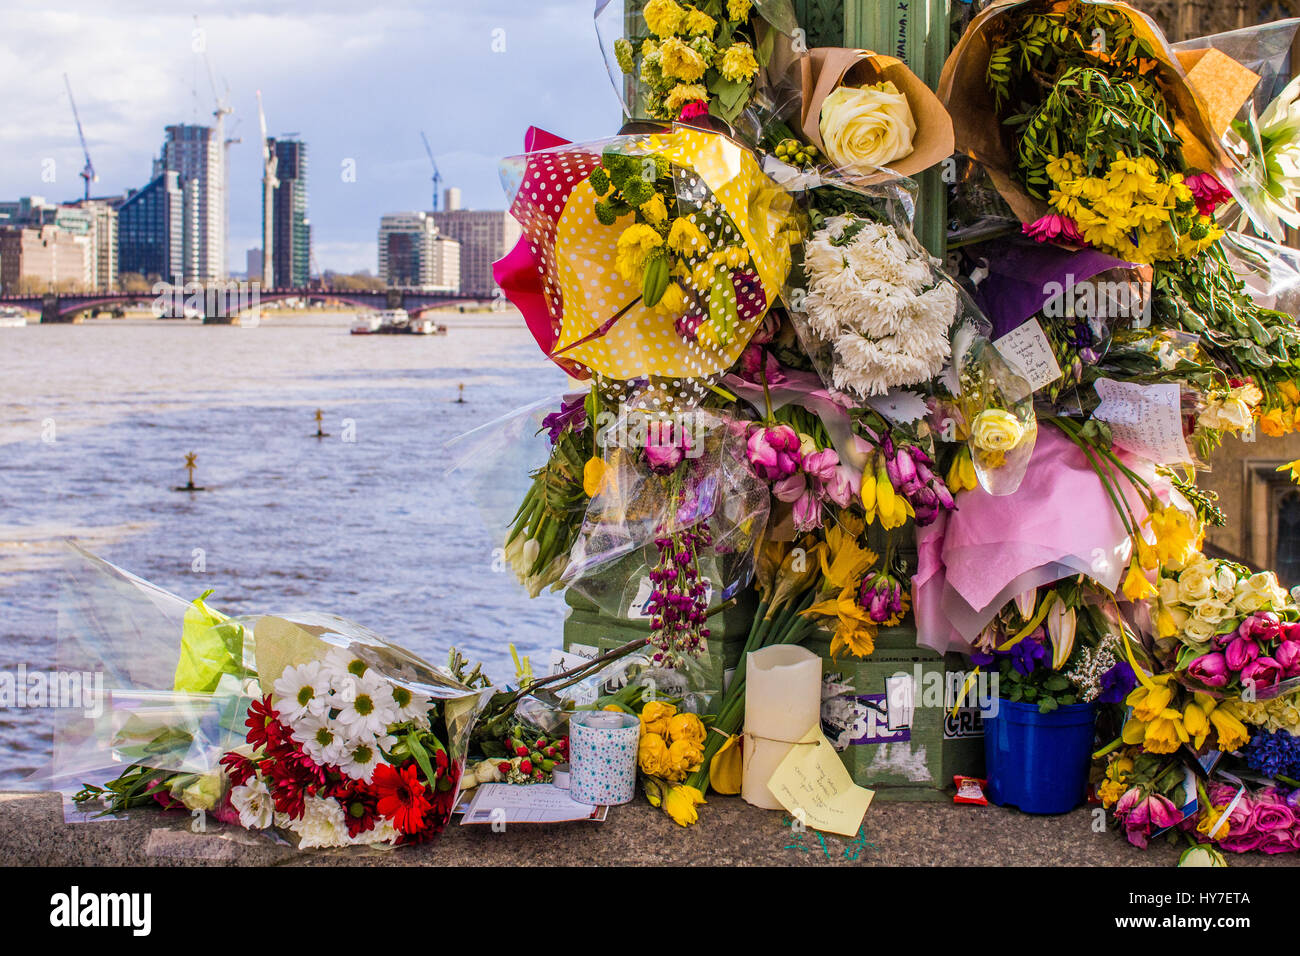 Floral tribute on Westminster Bridge in London after terrorist attack in March 17. Picture Apr 17. Stock Photo